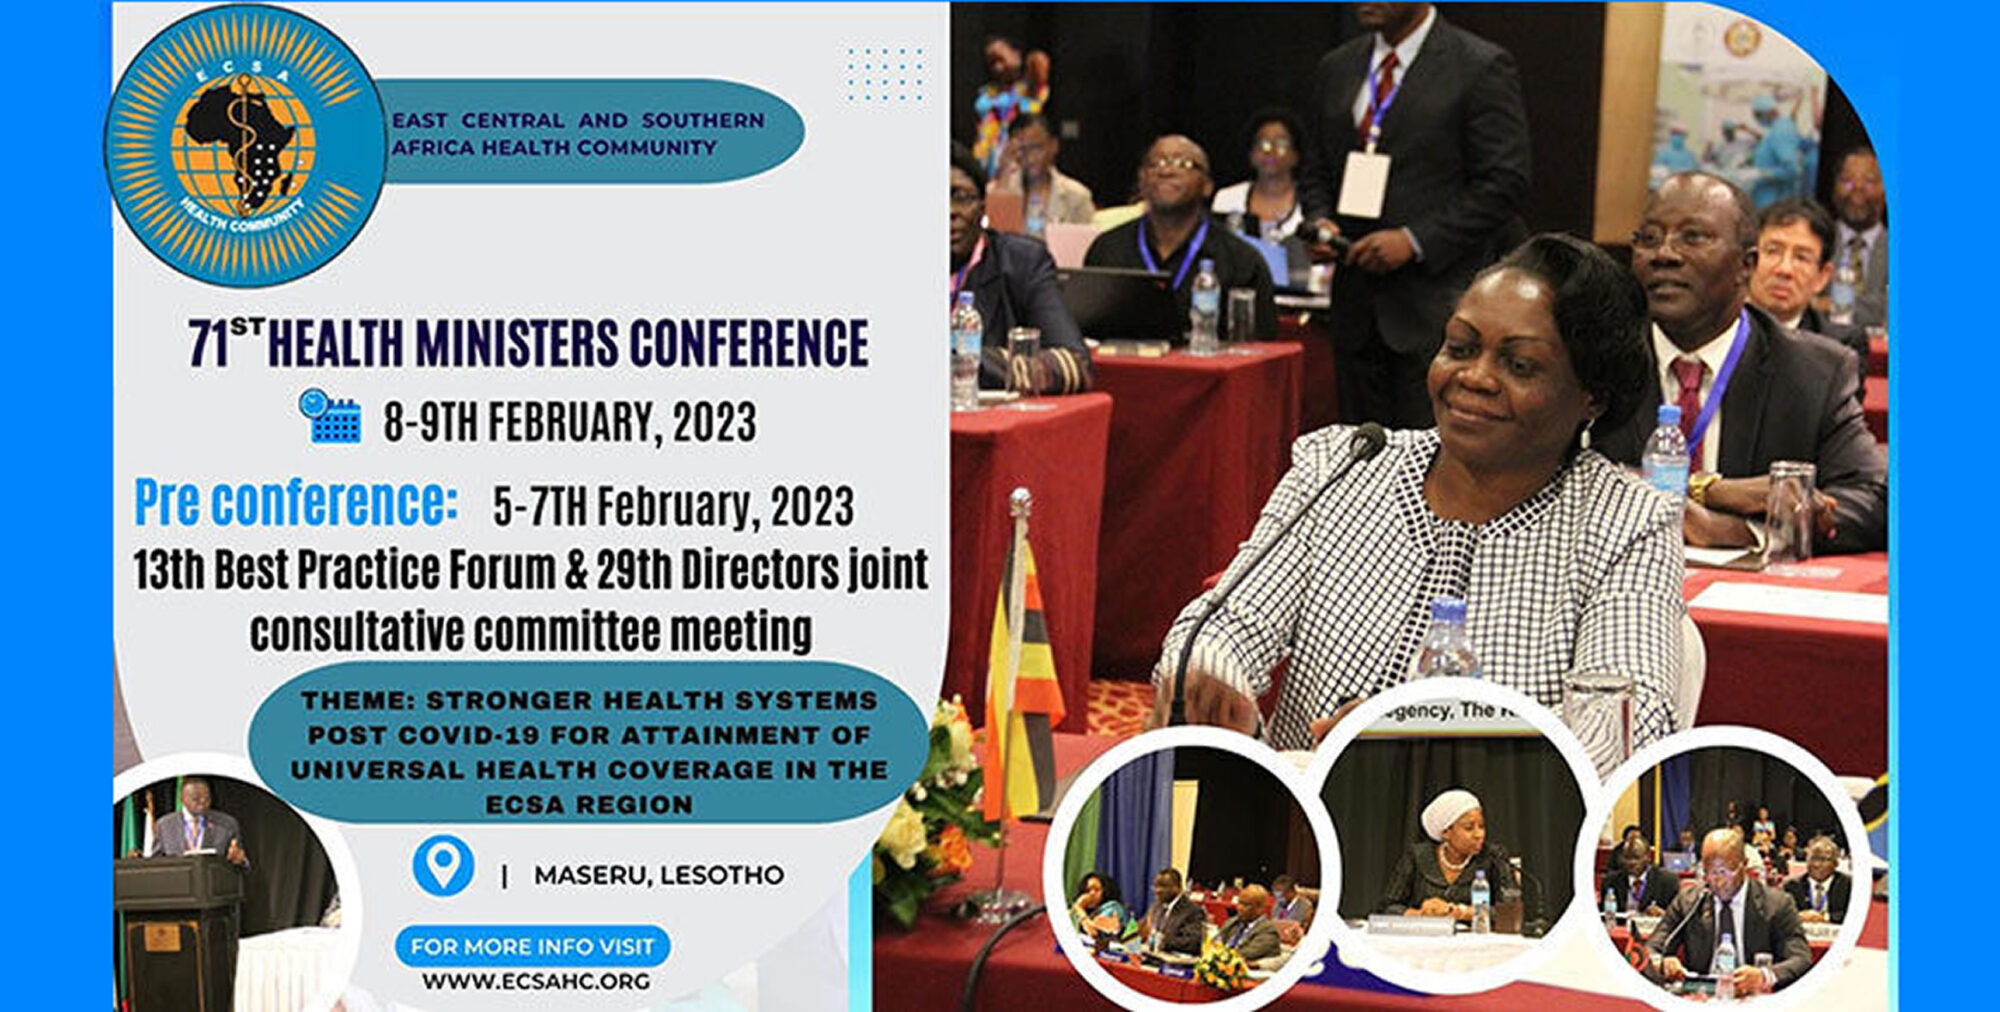 East Central and Southern Africa Health Community's 13th Best Practices Forum & 71st Health Ministers Conference banner